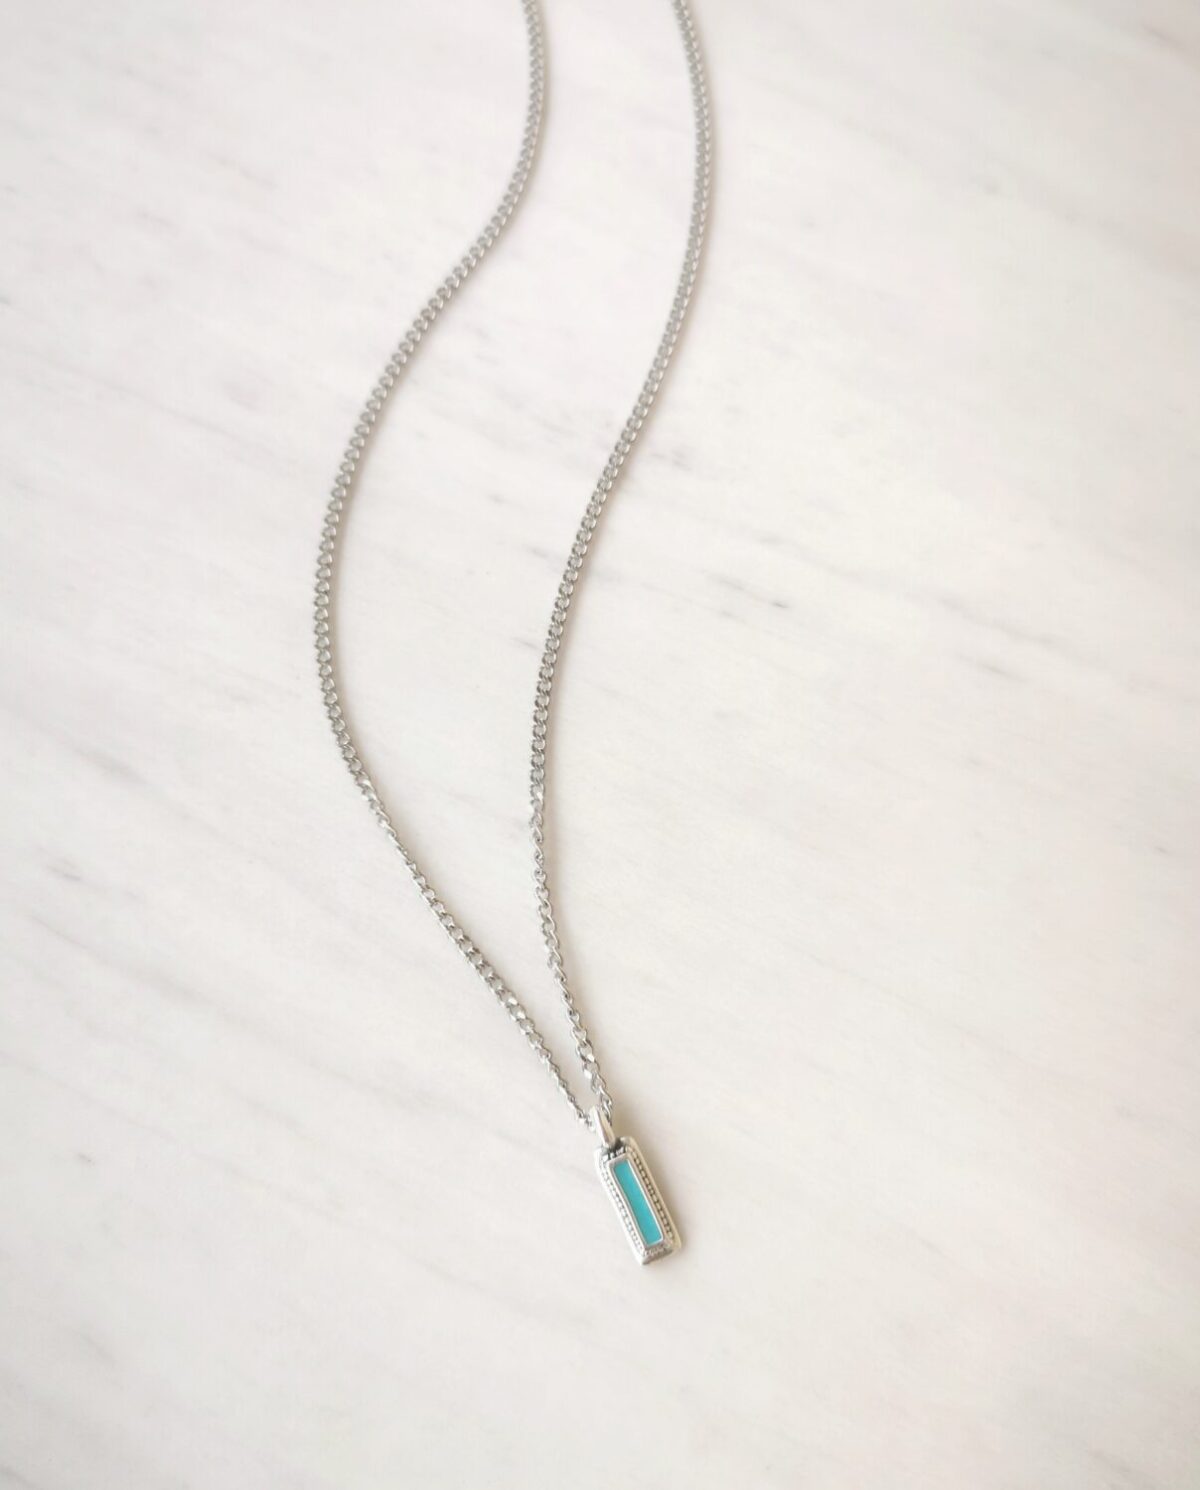 Turquoise rectangle necklace